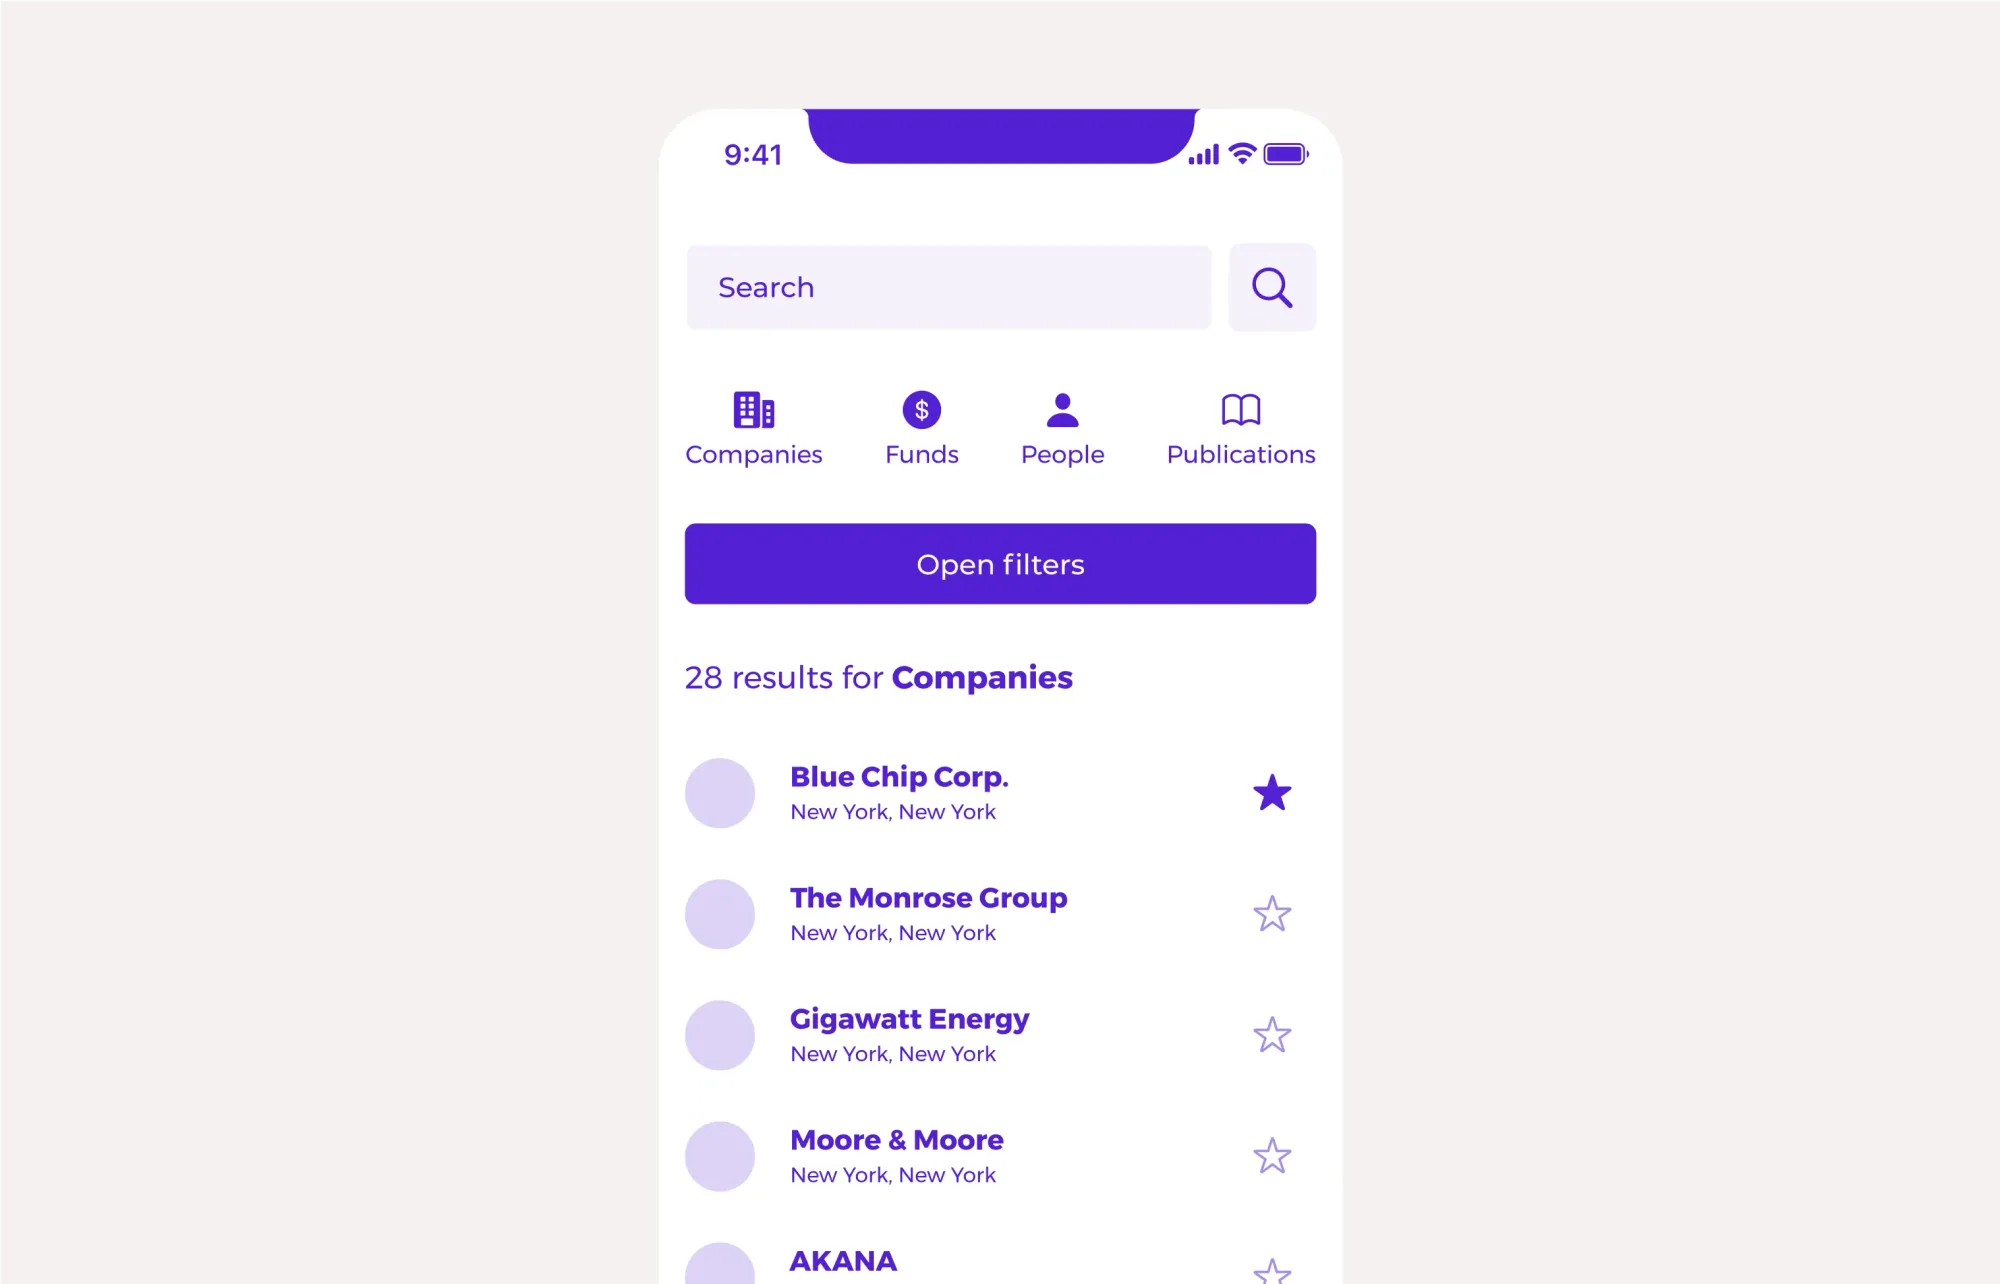 Search results on a mobile app displaying 28 companies in Finance Technology in New York. The companies listed include Blue Chip Corp., The Monrose Group, Gigawatt Energy, Moore & Moore, and AKANA.